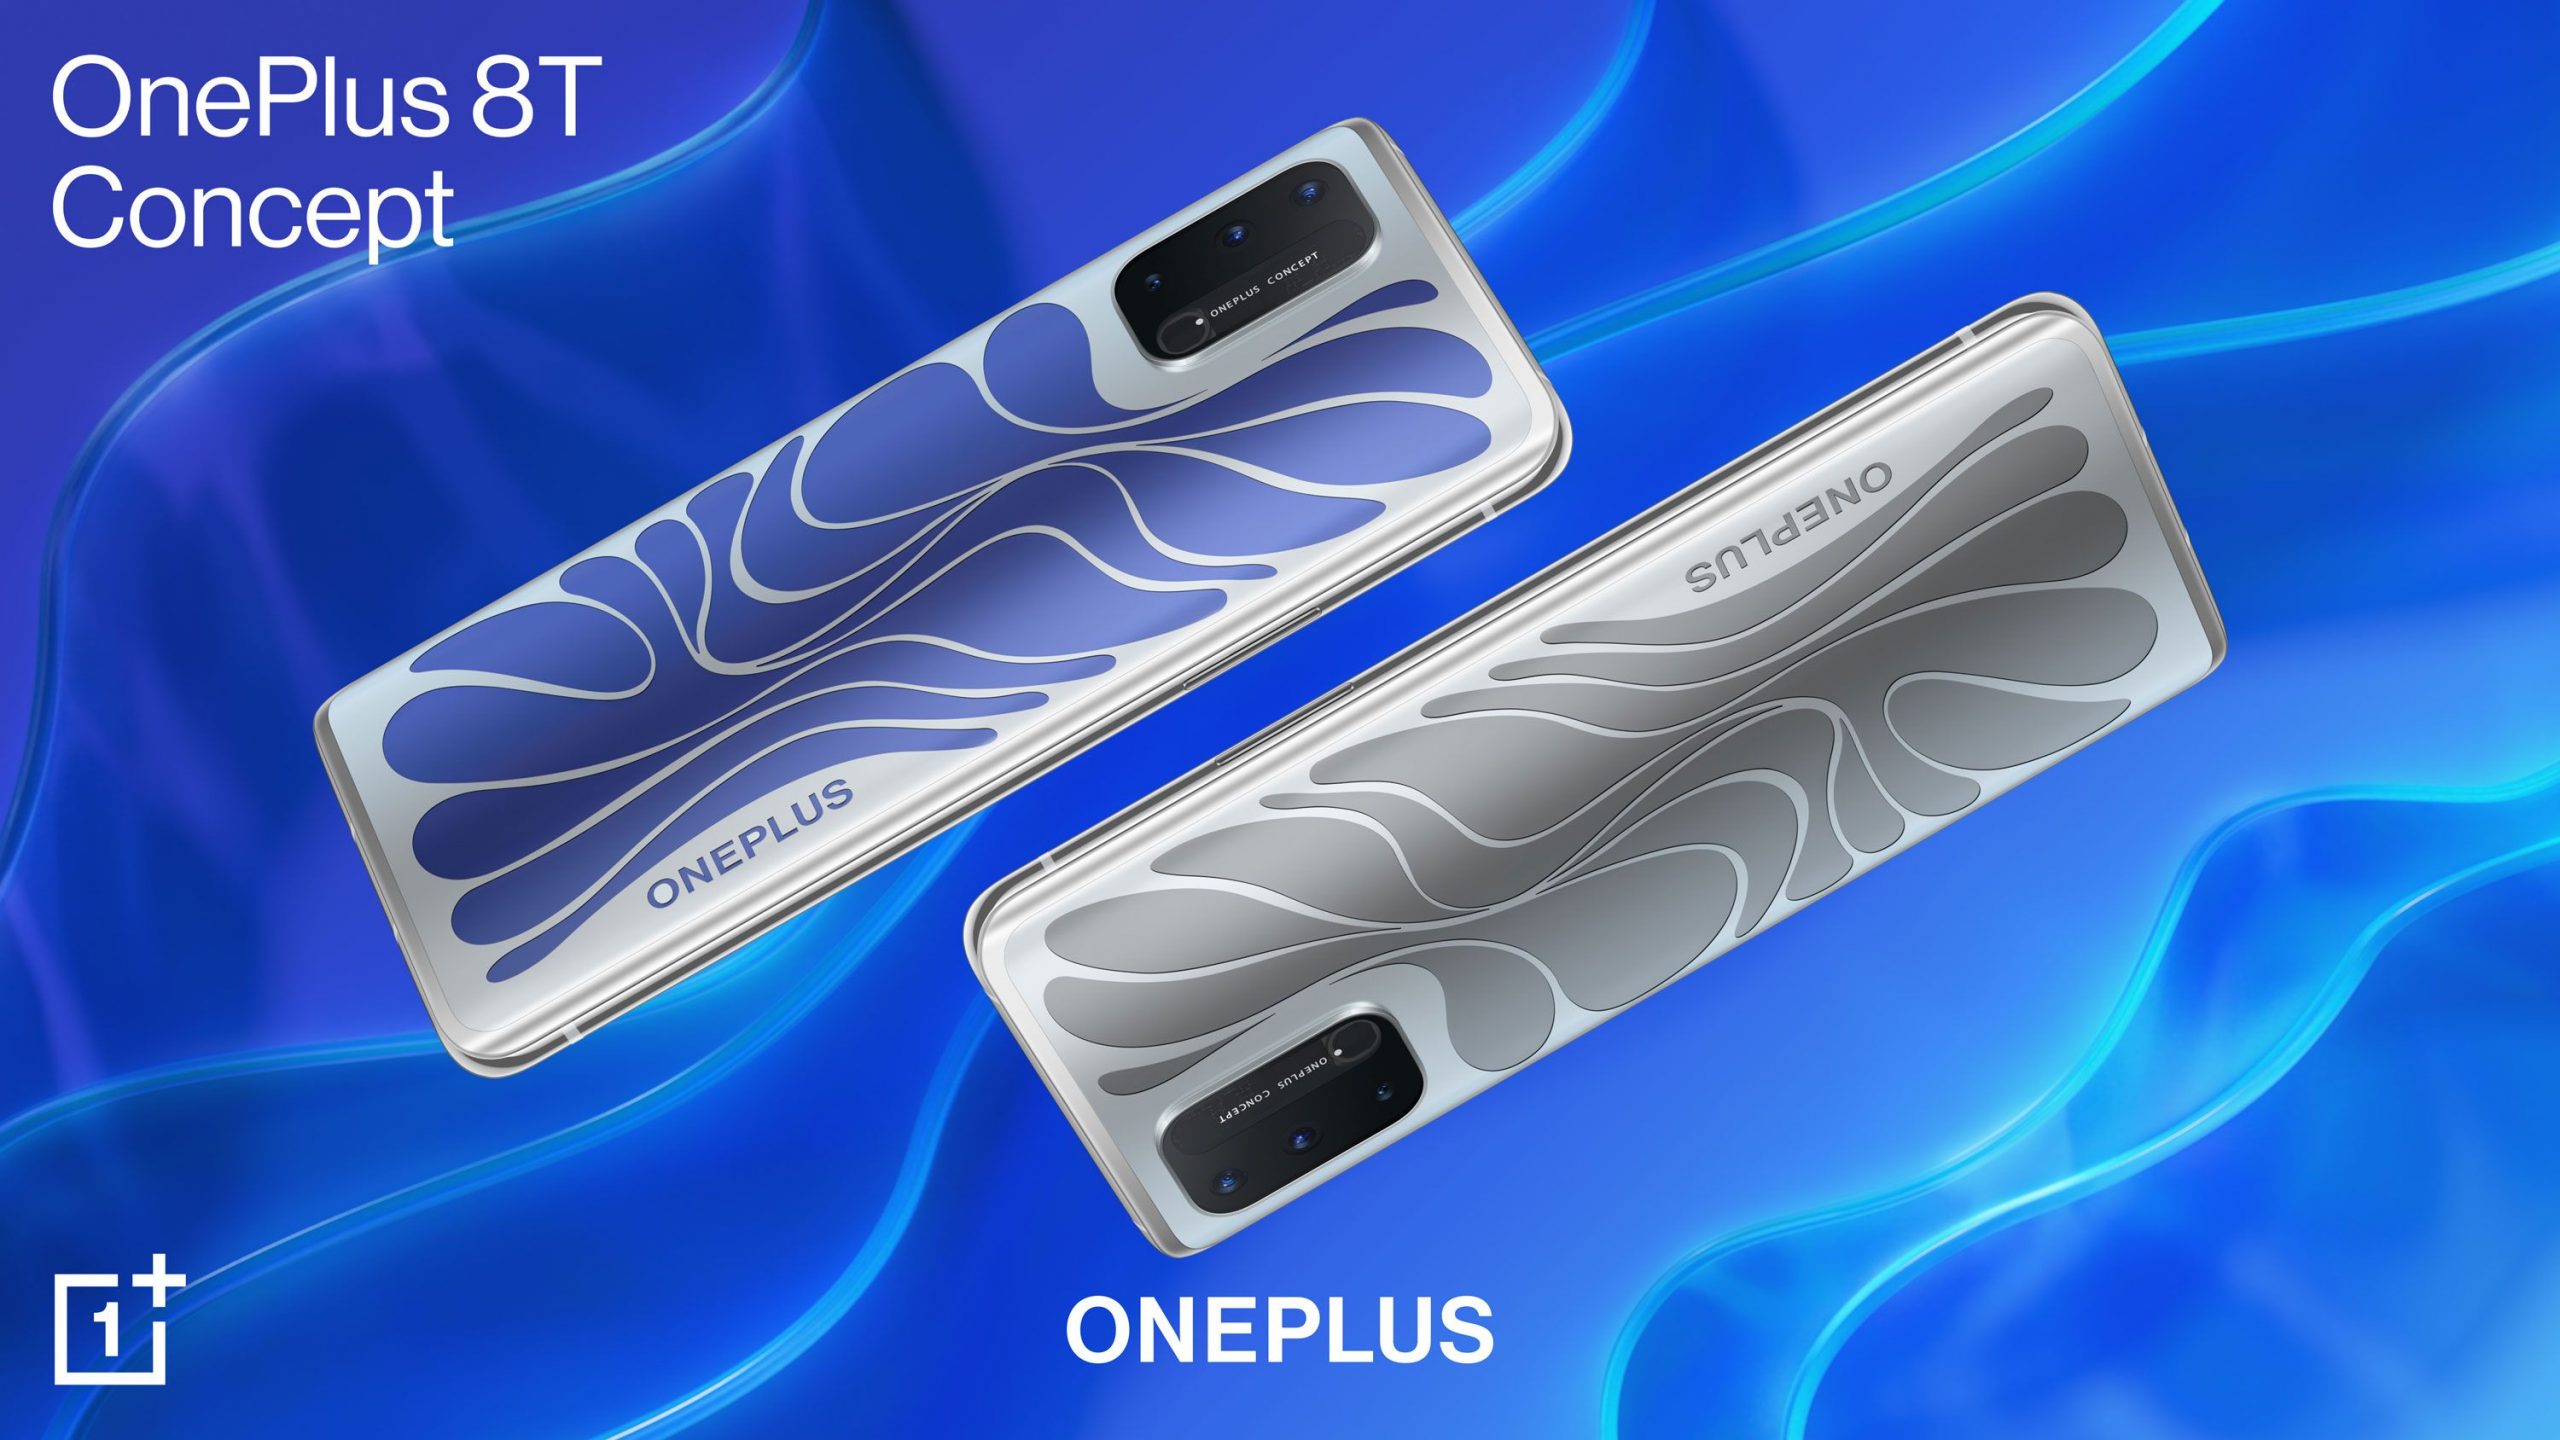 Latest OnePlus concept phone can change colors as you breathe The